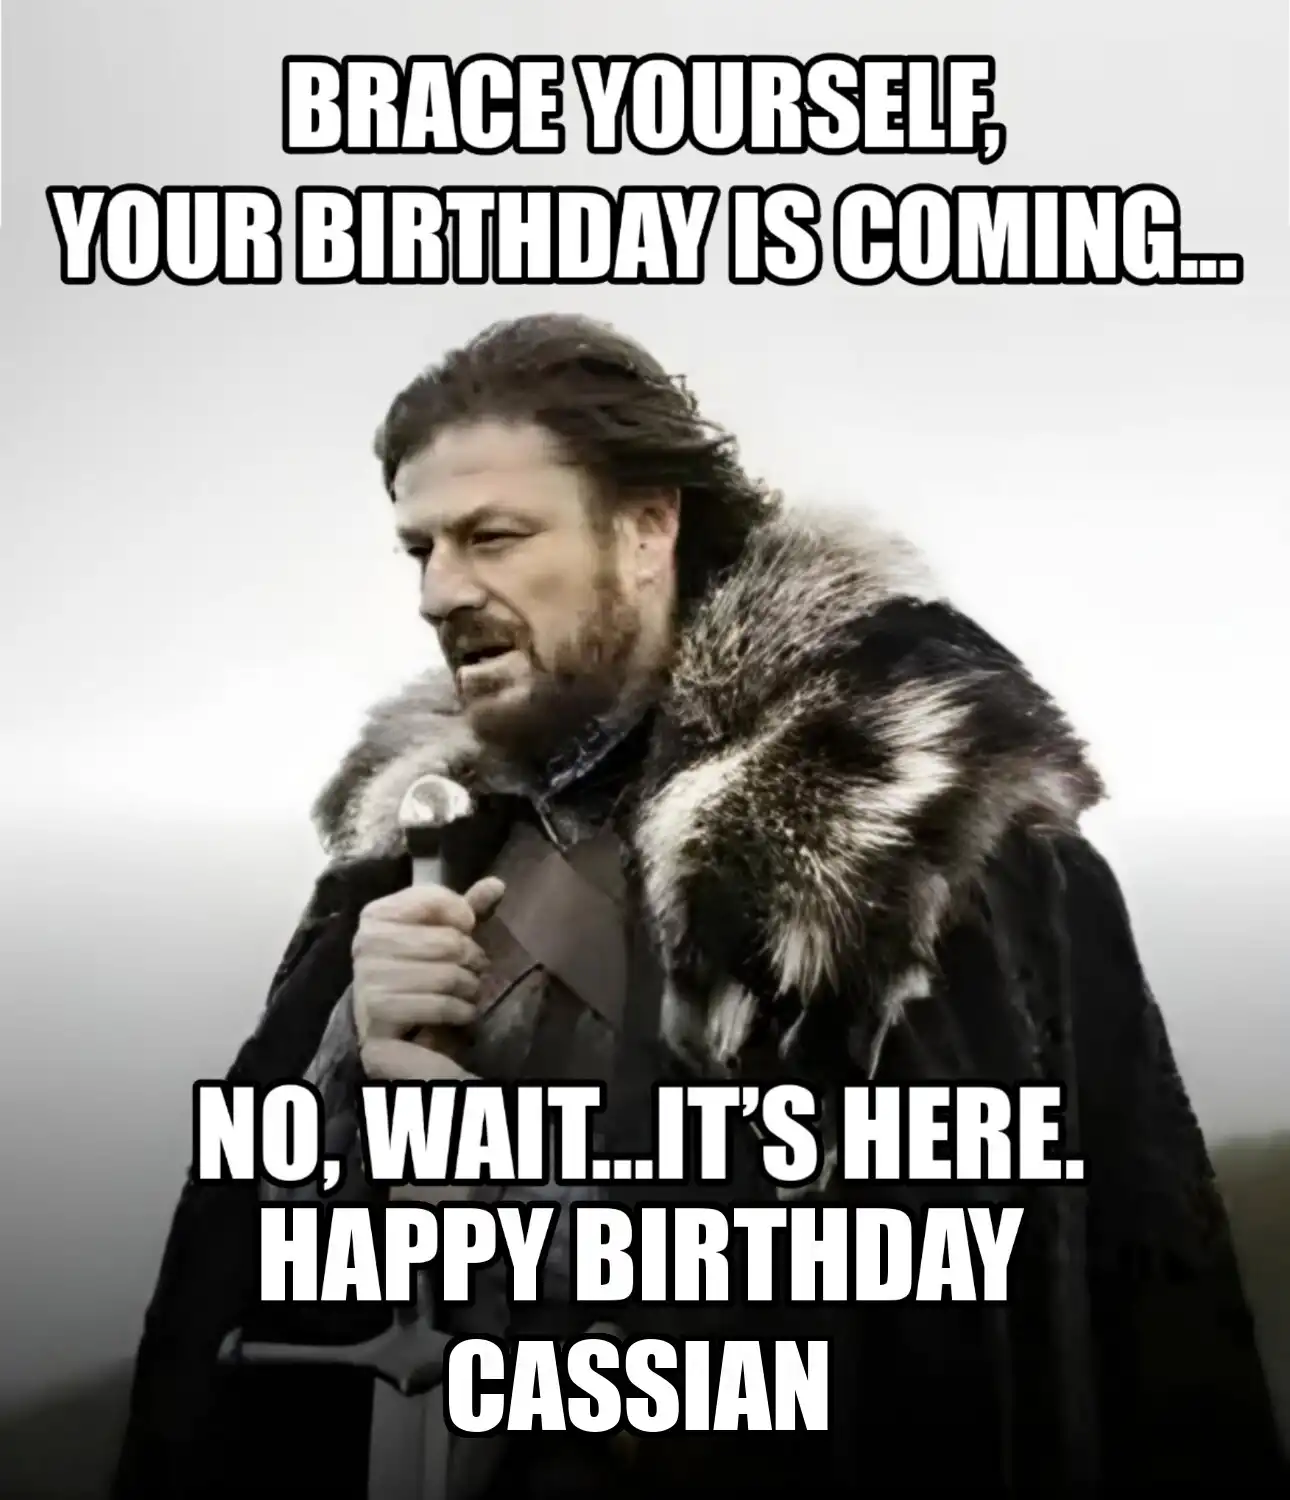 Happy Birthday Cassian Brace Yourself Your Birthday Is Coming Meme